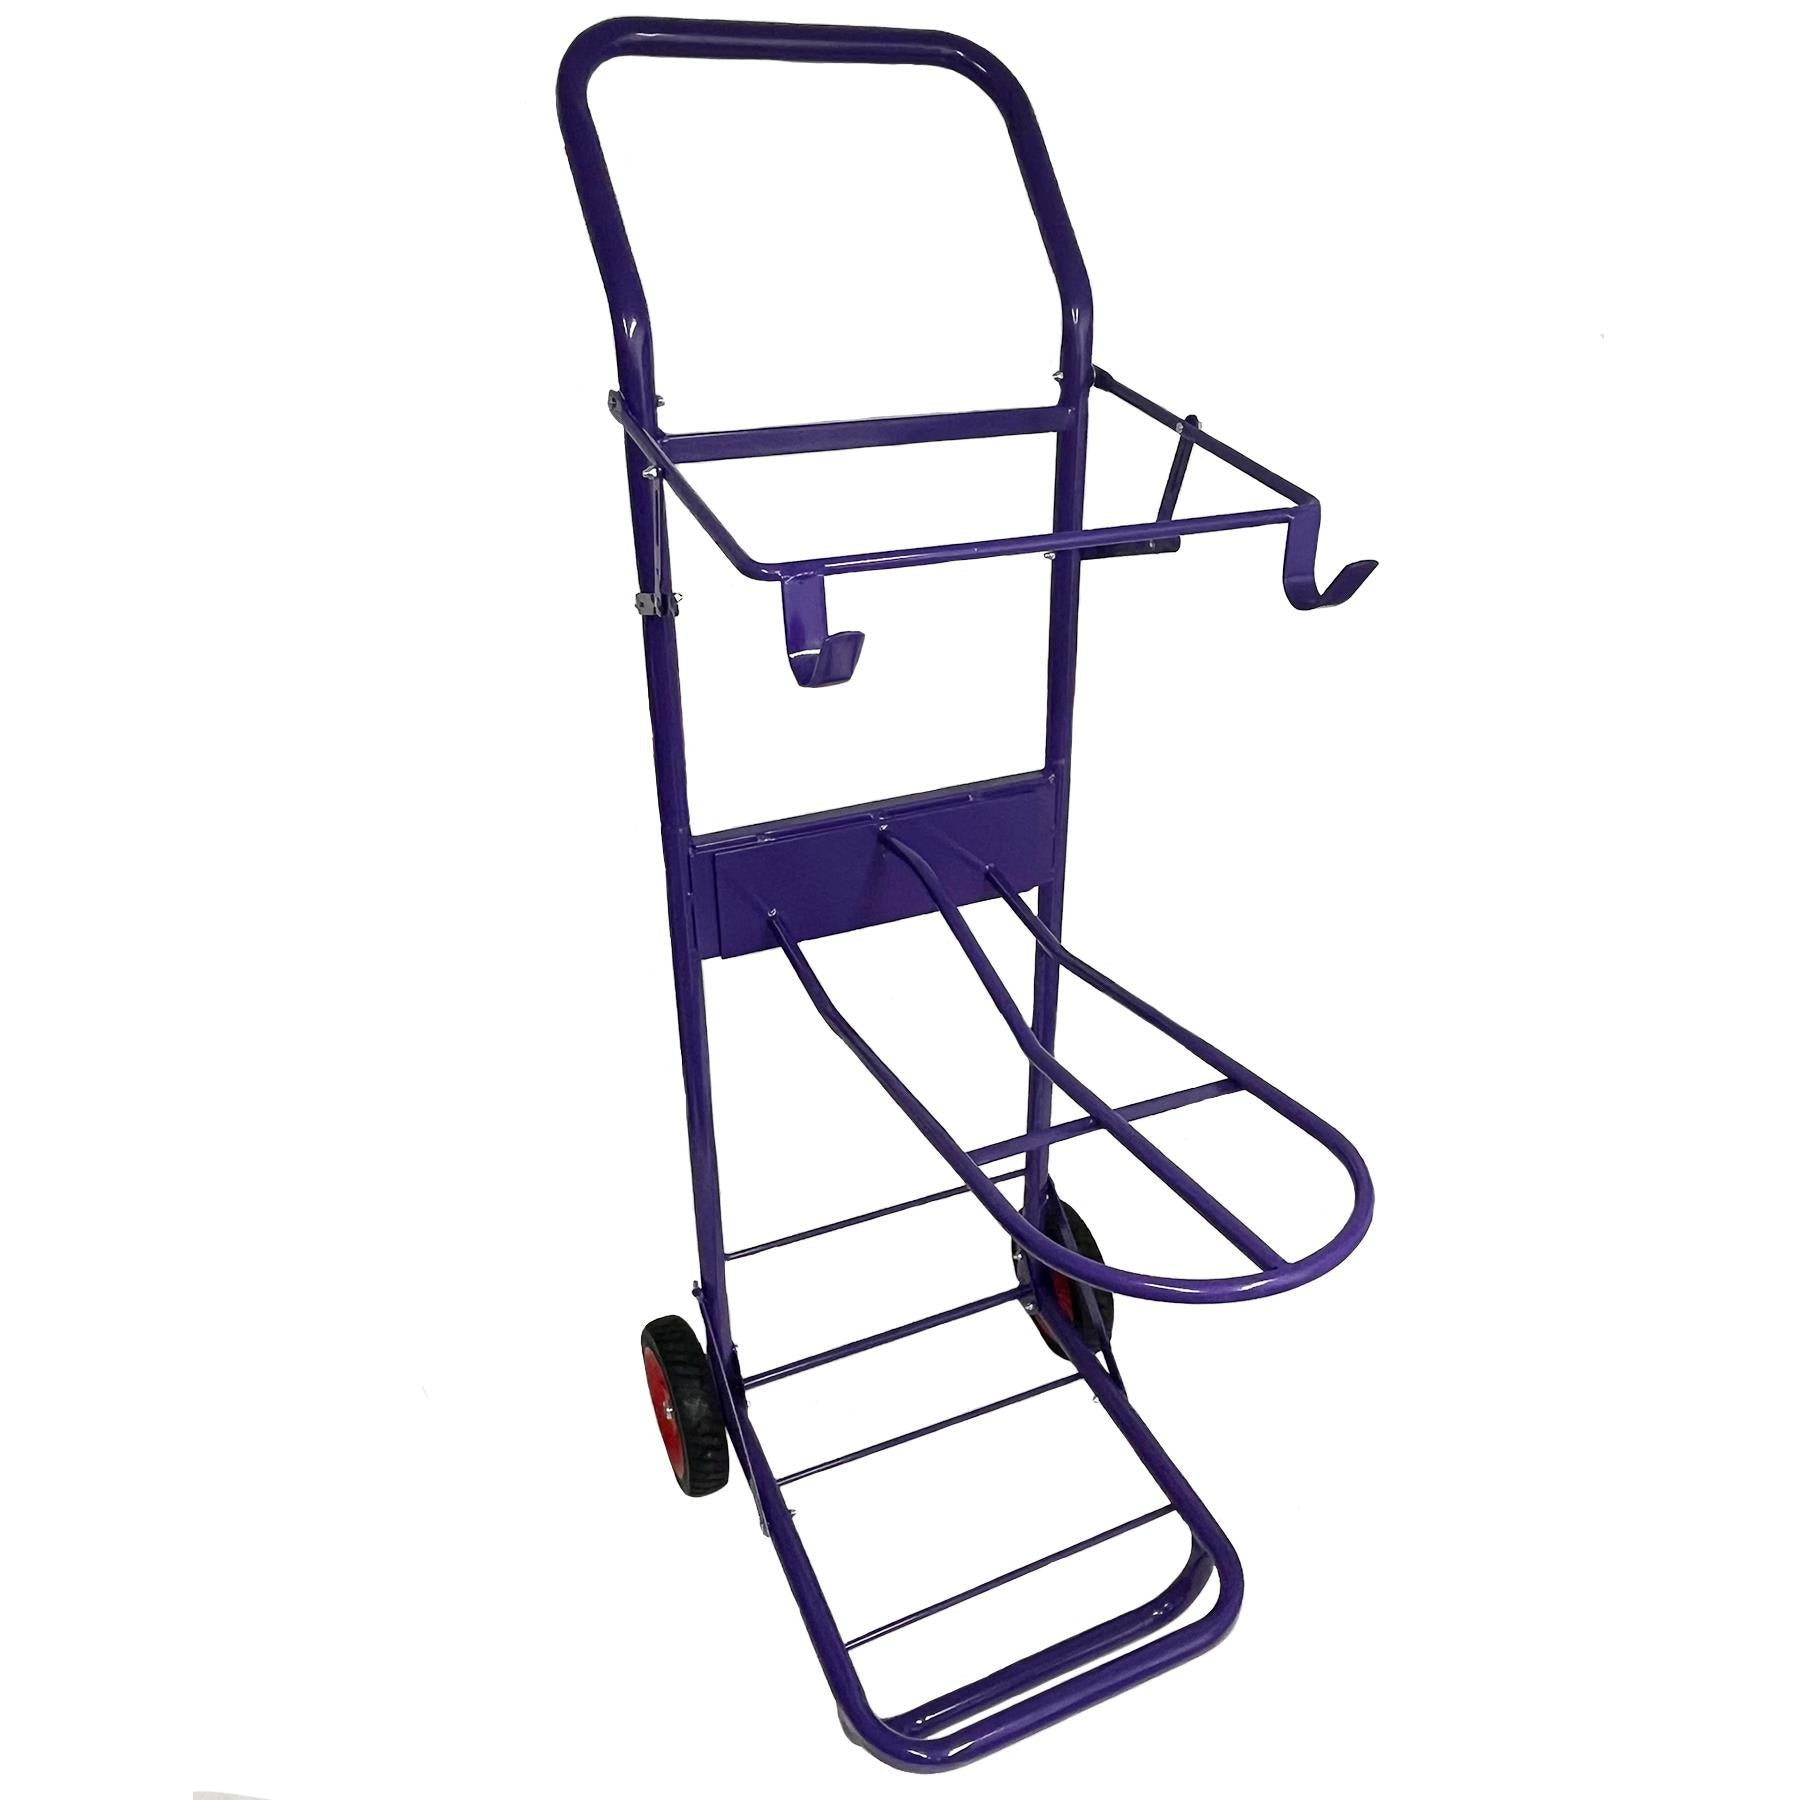 Heavy Duty Purple Saddle Trolley Equestrian Horse Stable Tack Room Equipment